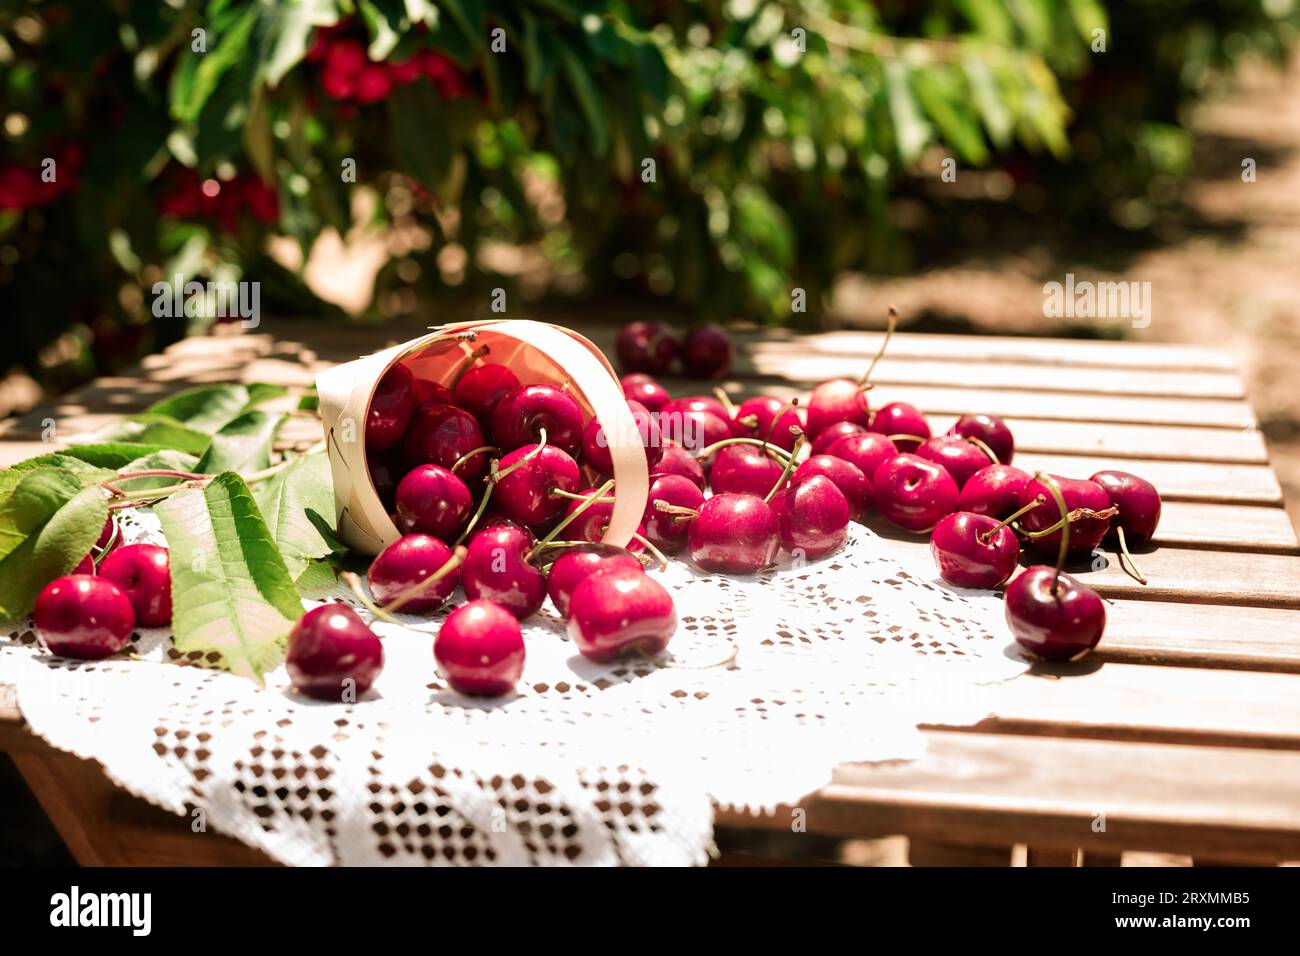 Ripe juicy cherry berry in wicker basket on lace napkin on table in cherry garden Stock Photo